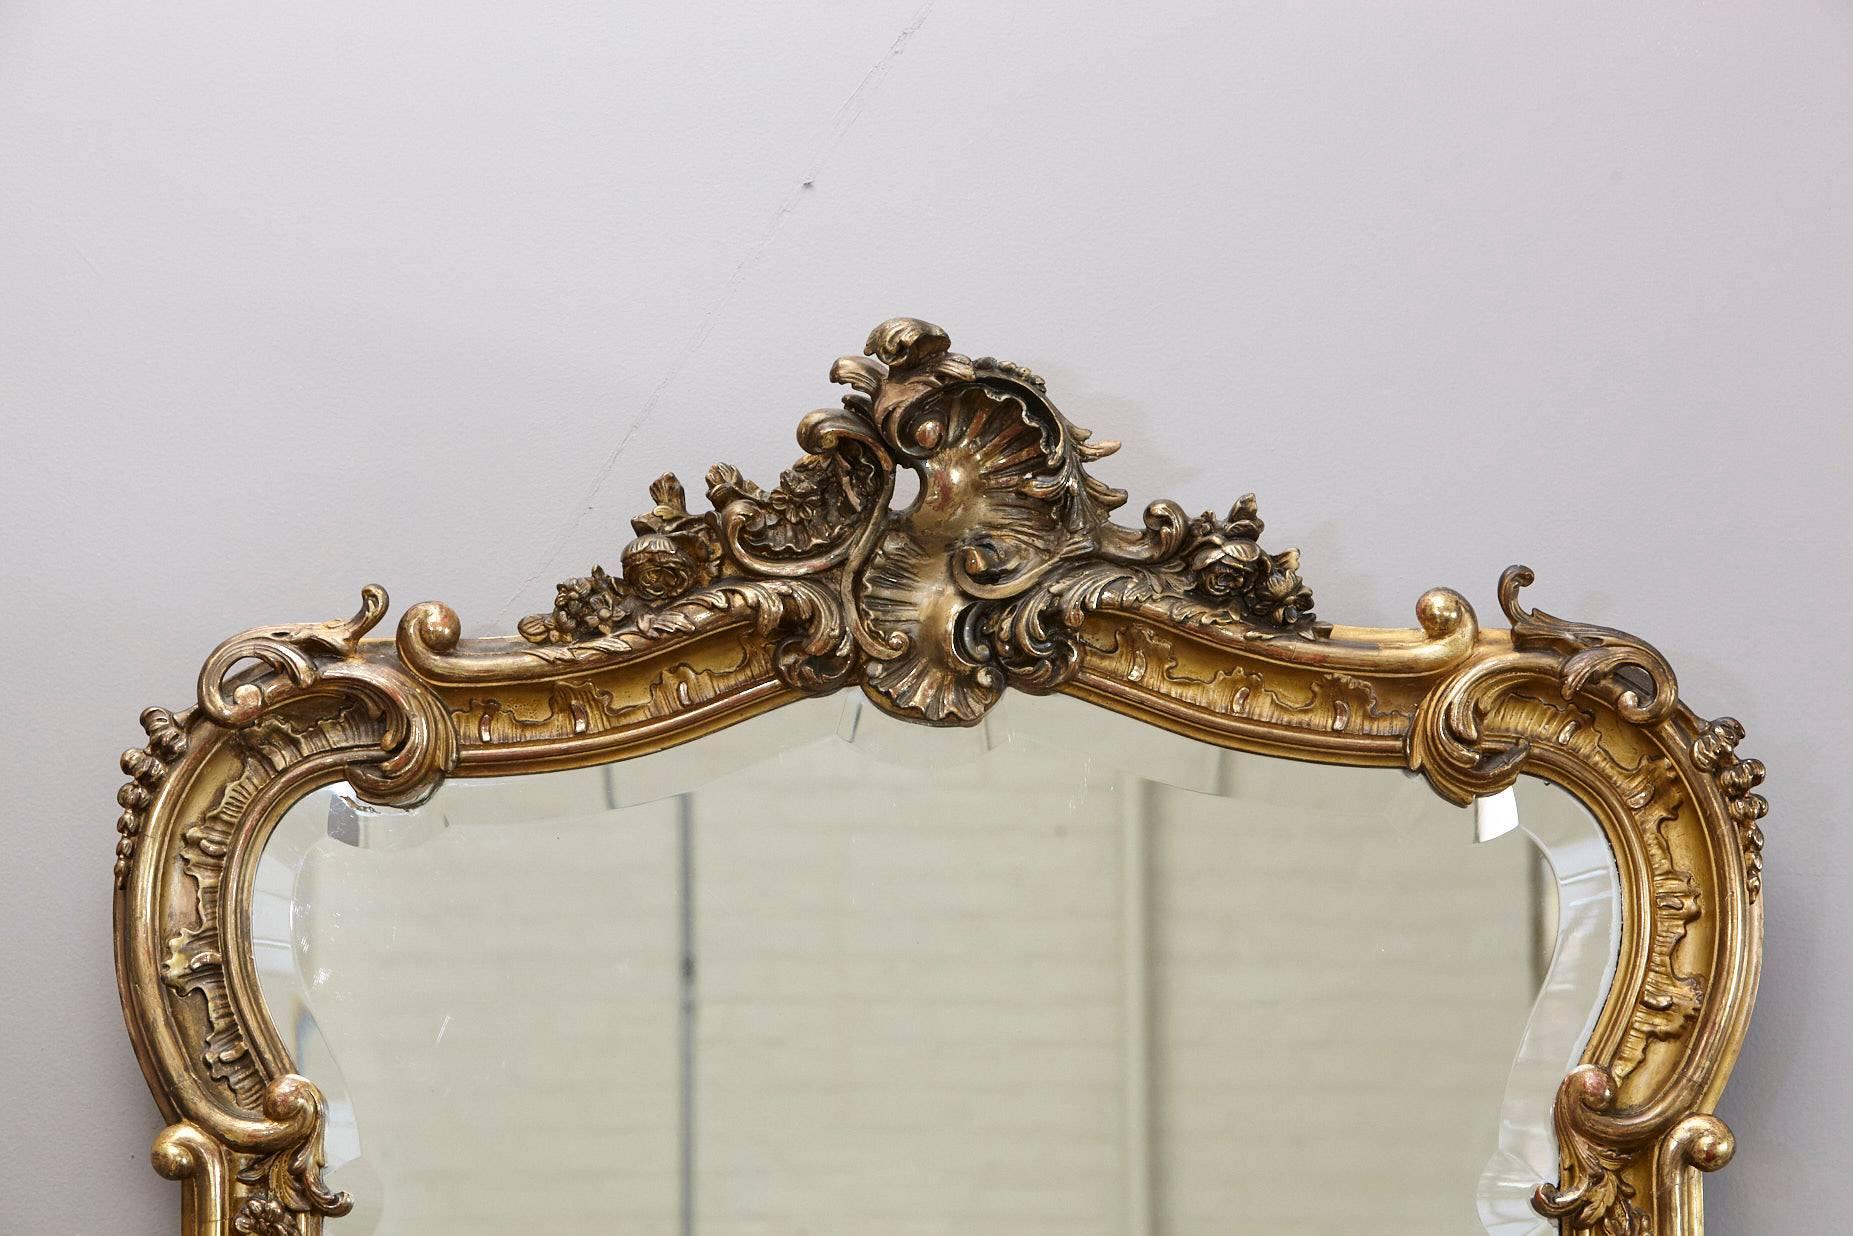 Beautiful 19th century French Rococo mirror with an moulded frame with finely carved foliate scrolling and rosettes, surmounted by an elaborated cresting showing a shell in the center and beveled glass.
Delicate interlacing of curves and counter